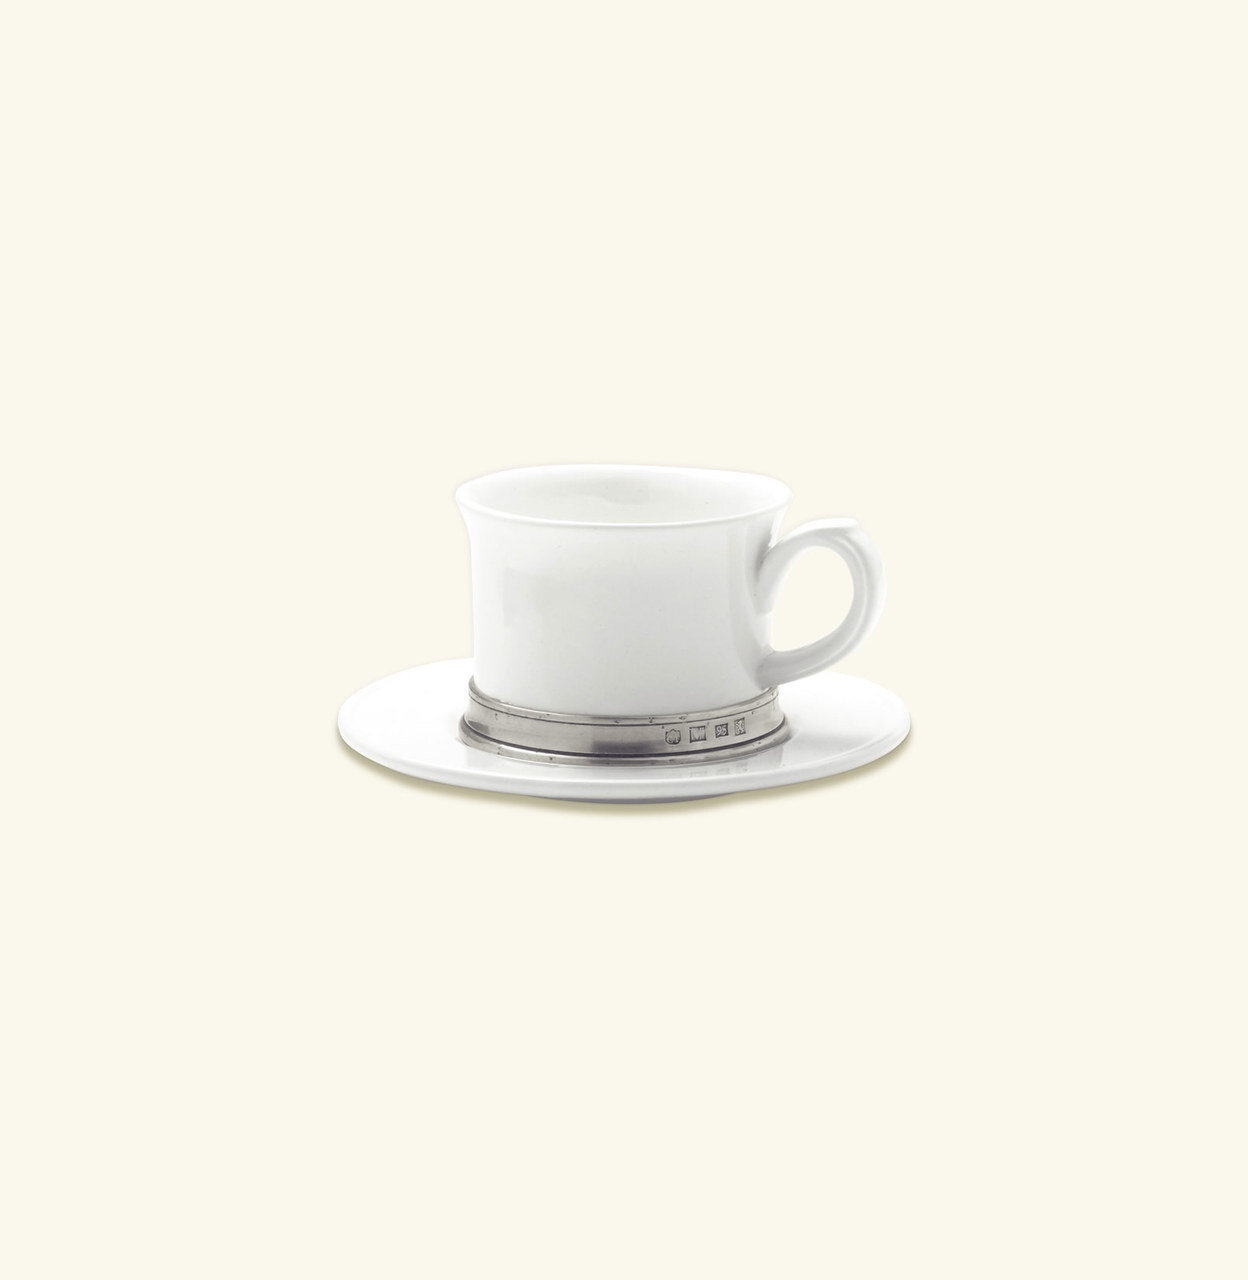 Match Pewter Convivio Cappucino Tea Cup With Saucer - White